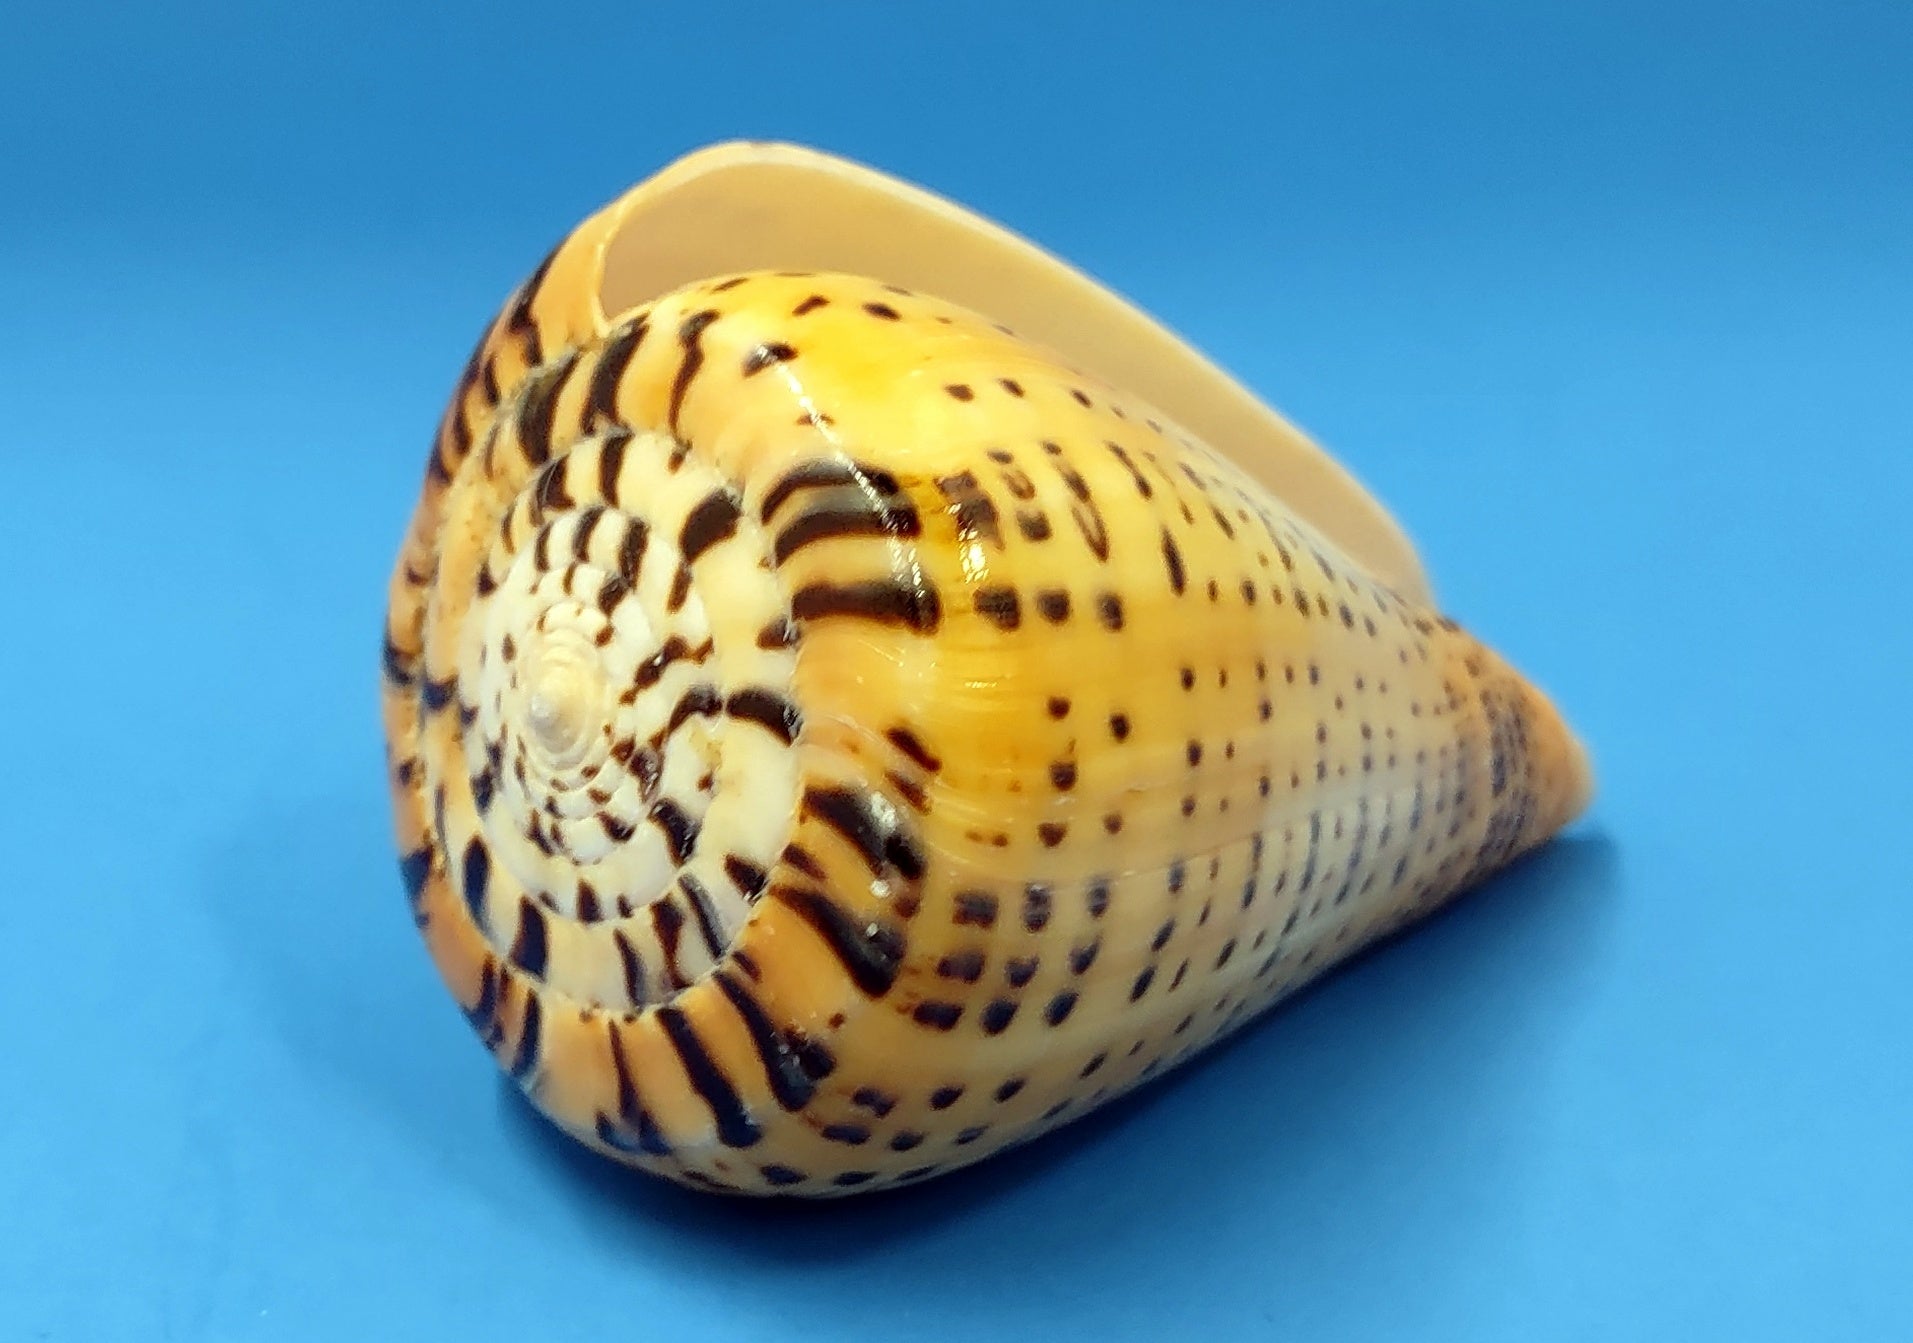 Beech Cone Polished Seashell - Conus Betulinus - (1 shell approx. 3.5-4 inches). Orange and black wrapped wide spiral shell with black dotted designs around the outer side. Copyright 2022 SeaShellSupply.com.